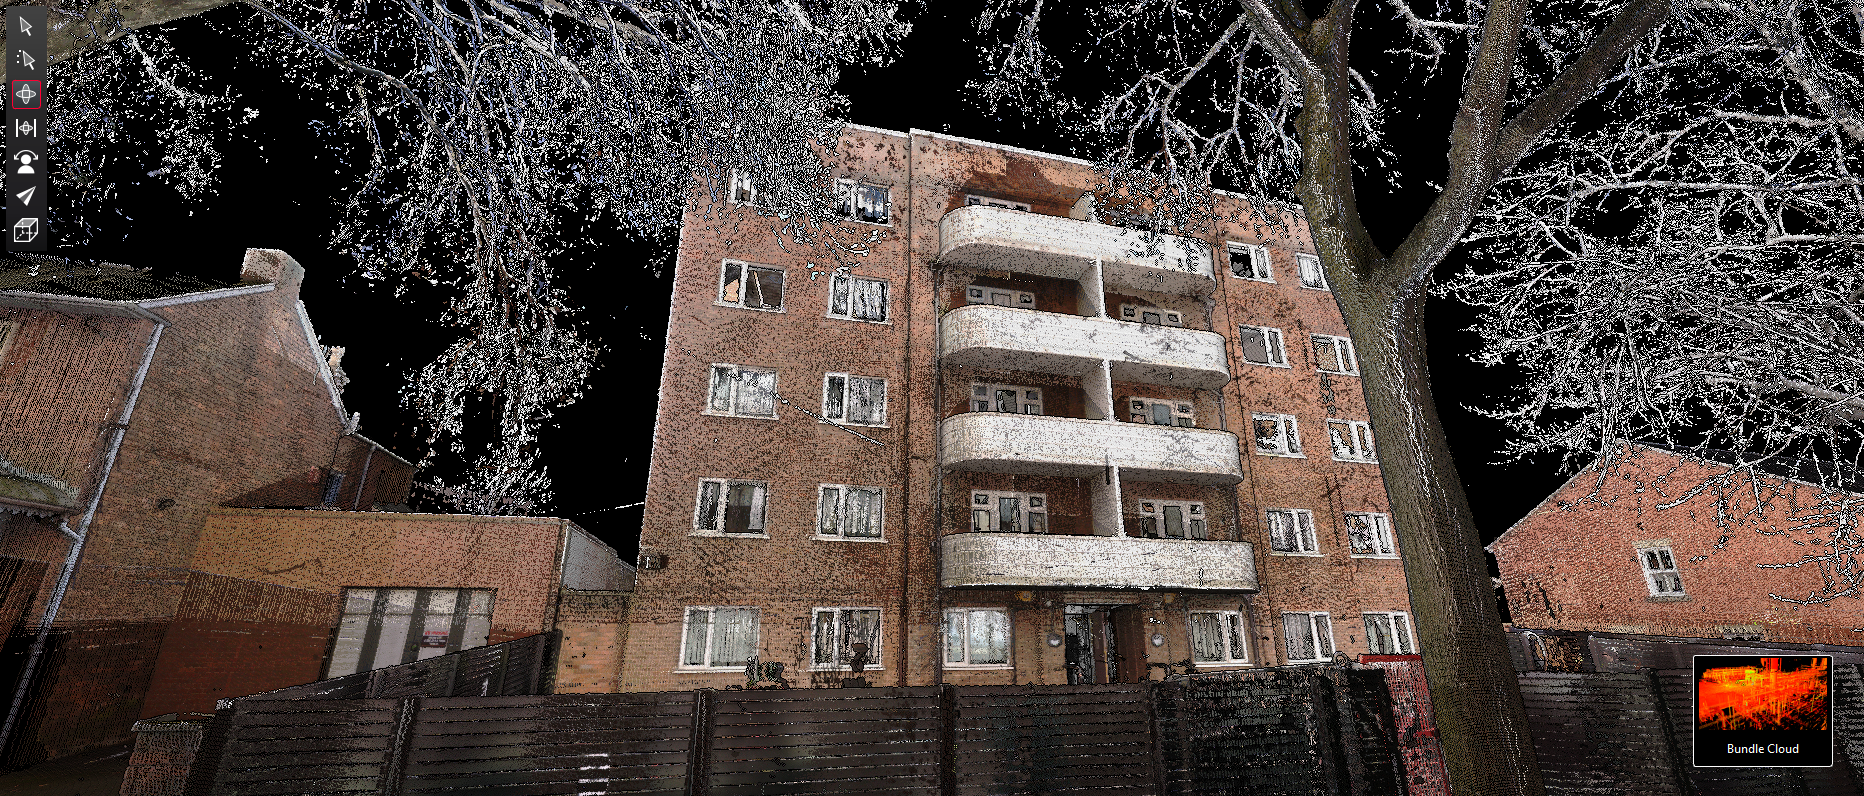 3D Laser Scanning Services in the UK